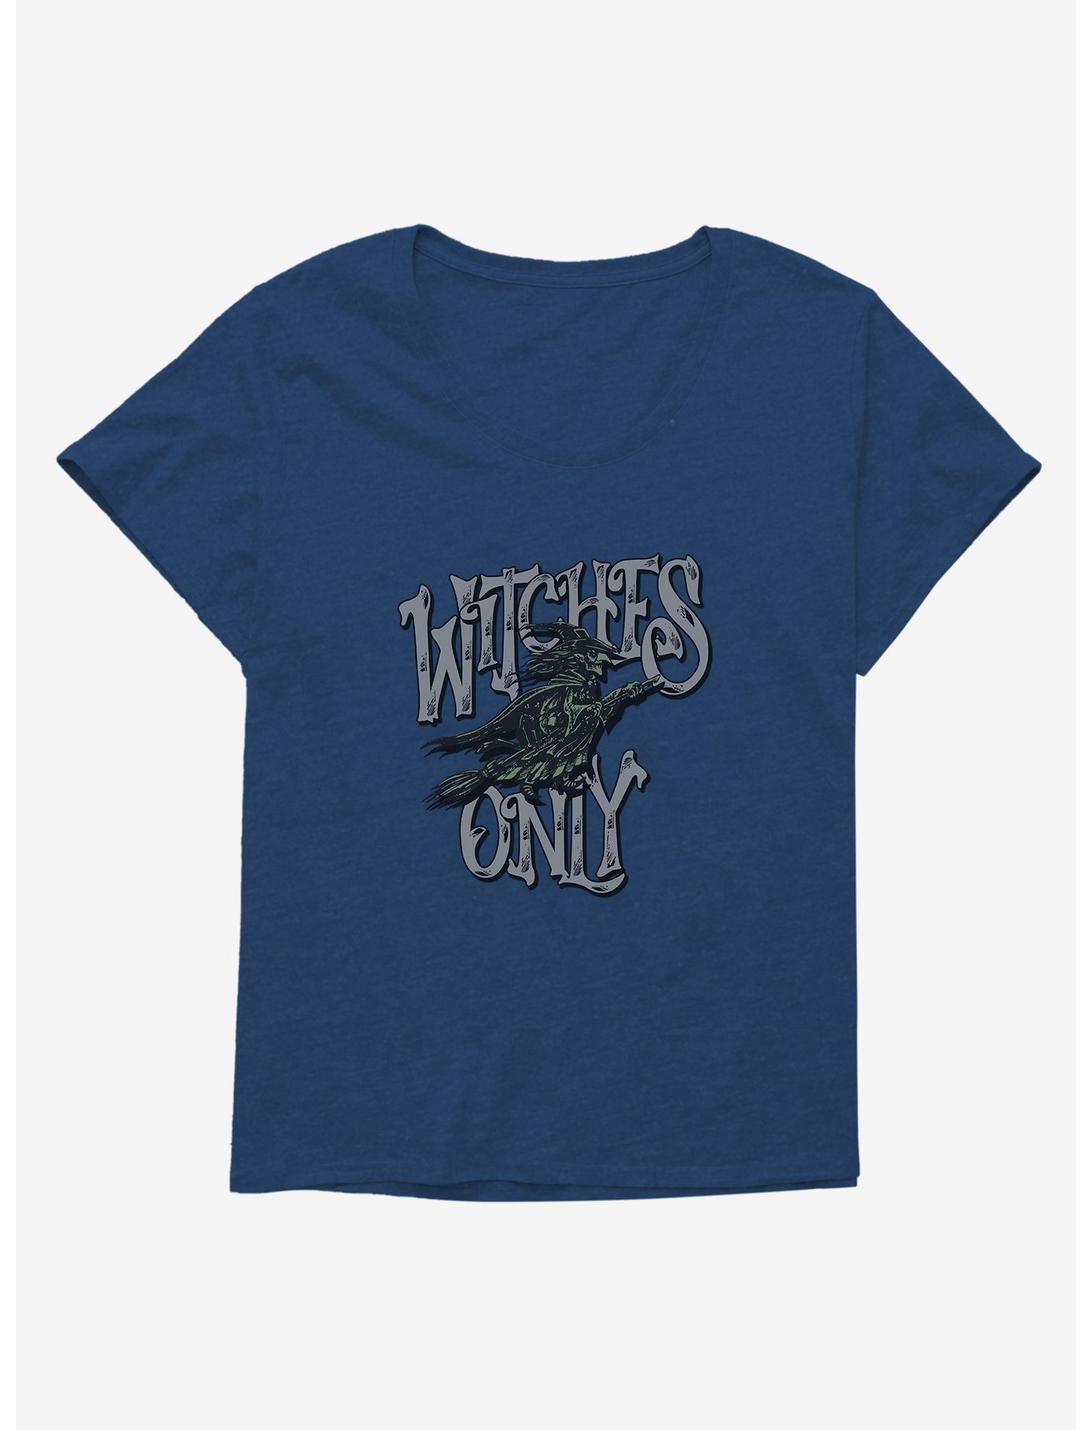 Plus Size Witches Only Womens T-Shirt Plus Size, , hi-res